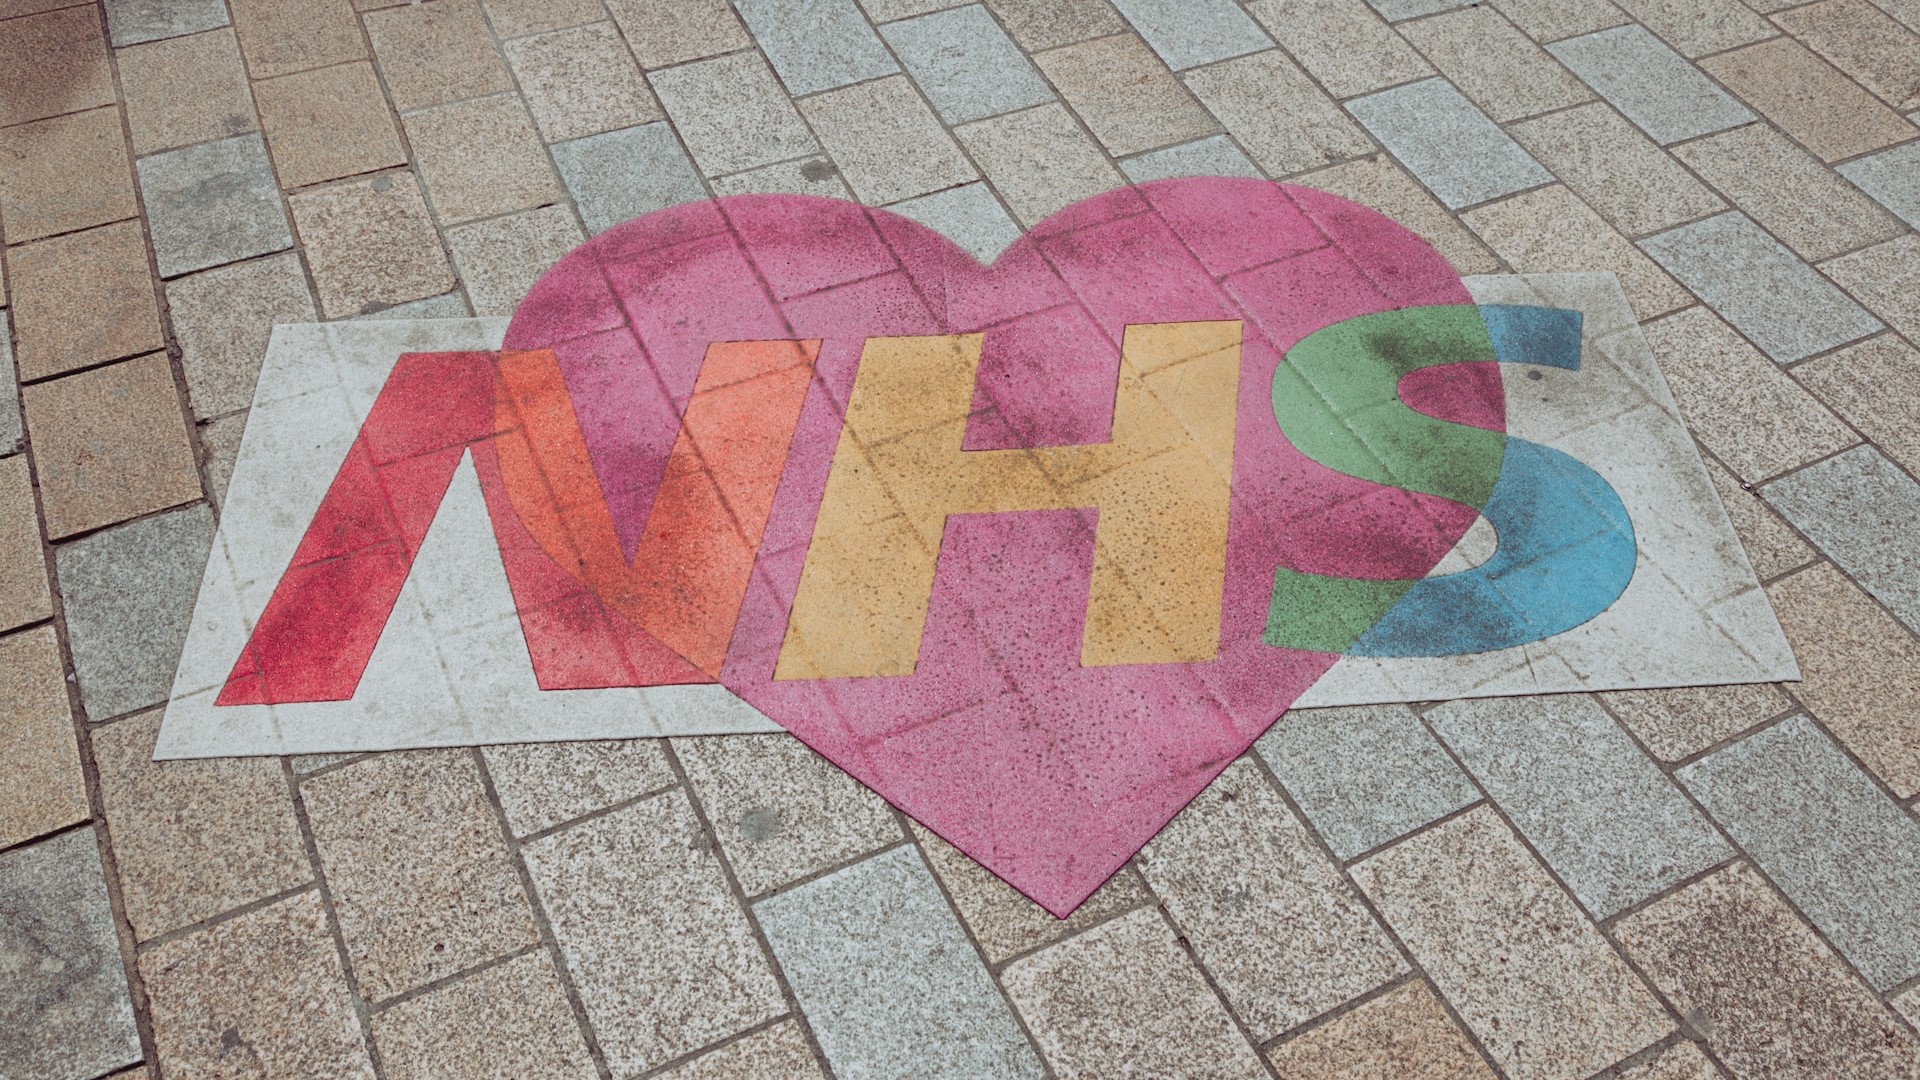 A drawing of a heart on a pavement with the letters NHS across the heart